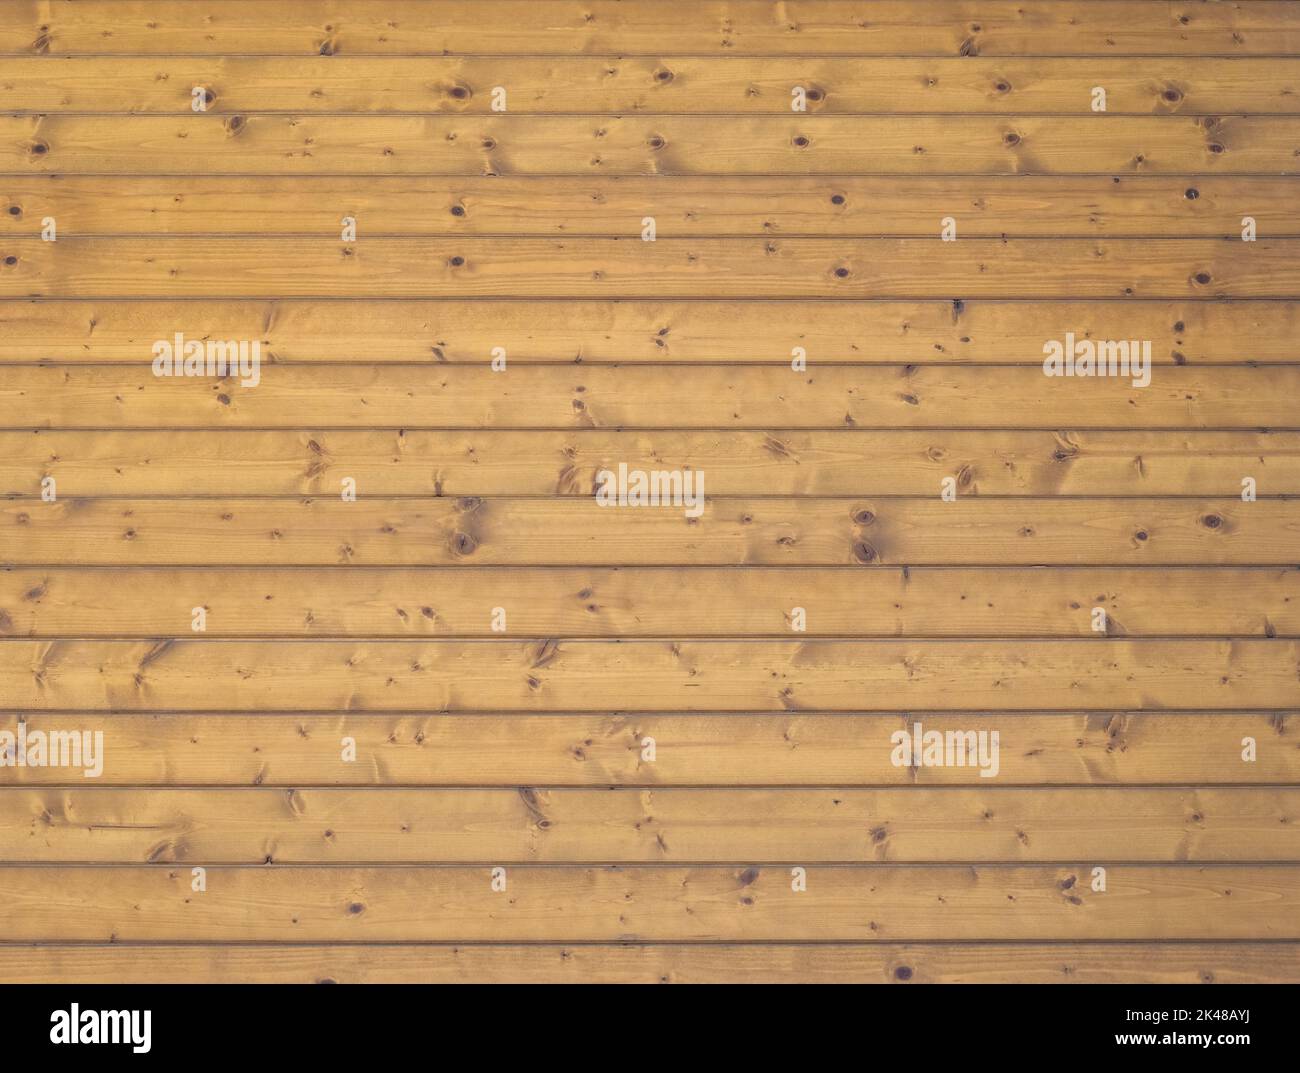 light brown wood texture useful as a background Stock Photo